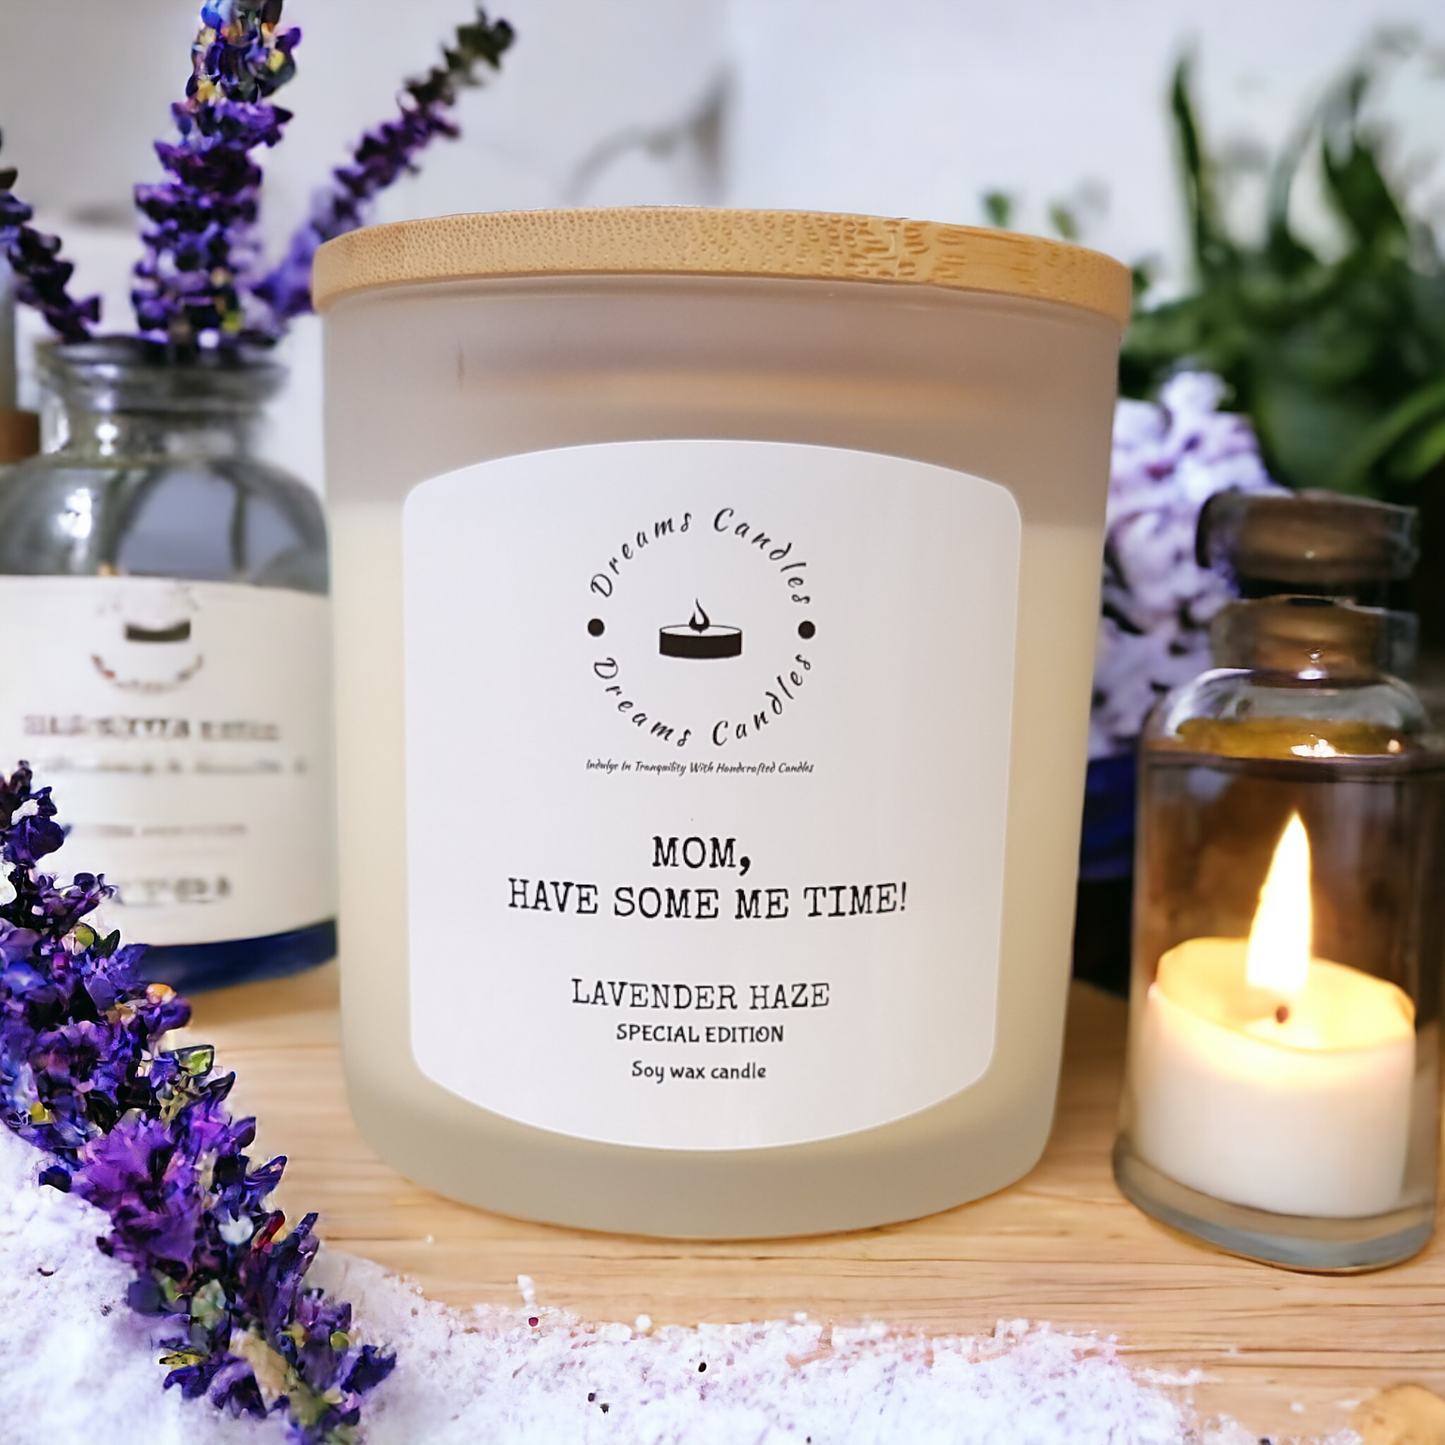 Lavender Haze for Mothers: Special Edition